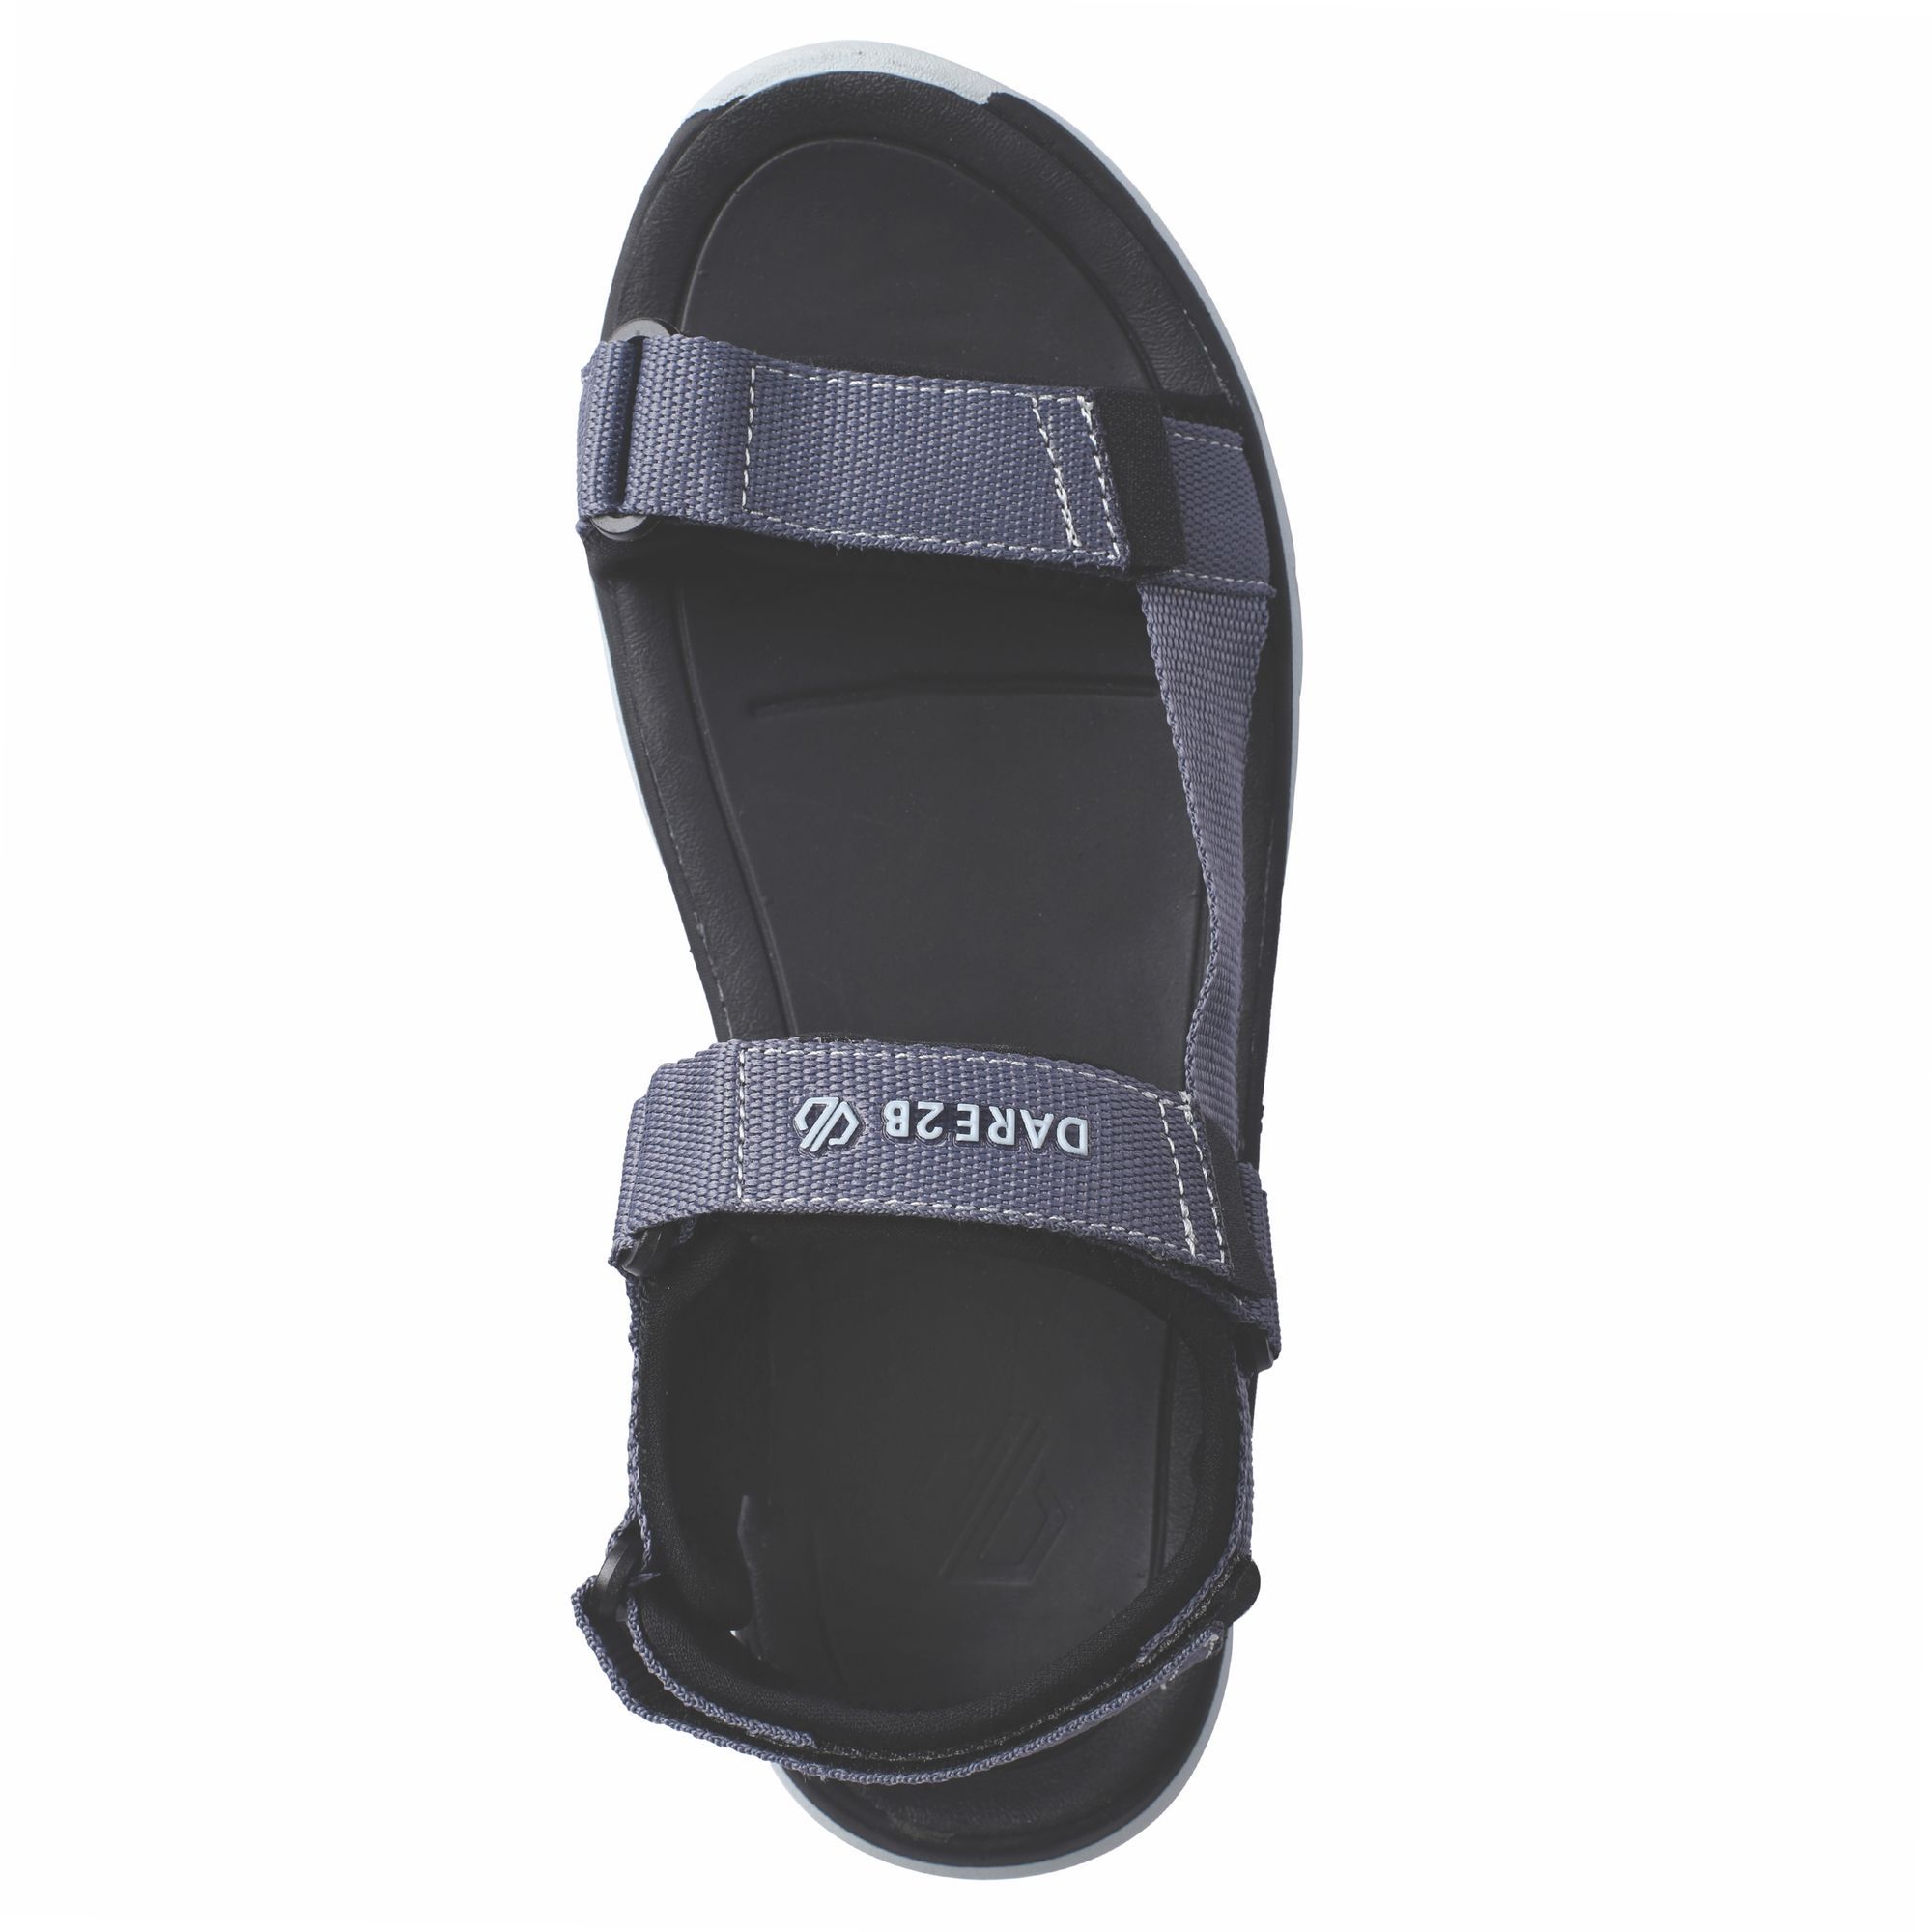 Material: 95% polyester, 5% polyamide. Webbing upper with spandex backing for support and comfort. 3 points of adjustment for a versatile fit. Lightweight EVA bottom unit with rubber pods for a perfect balance of lightweight traction.